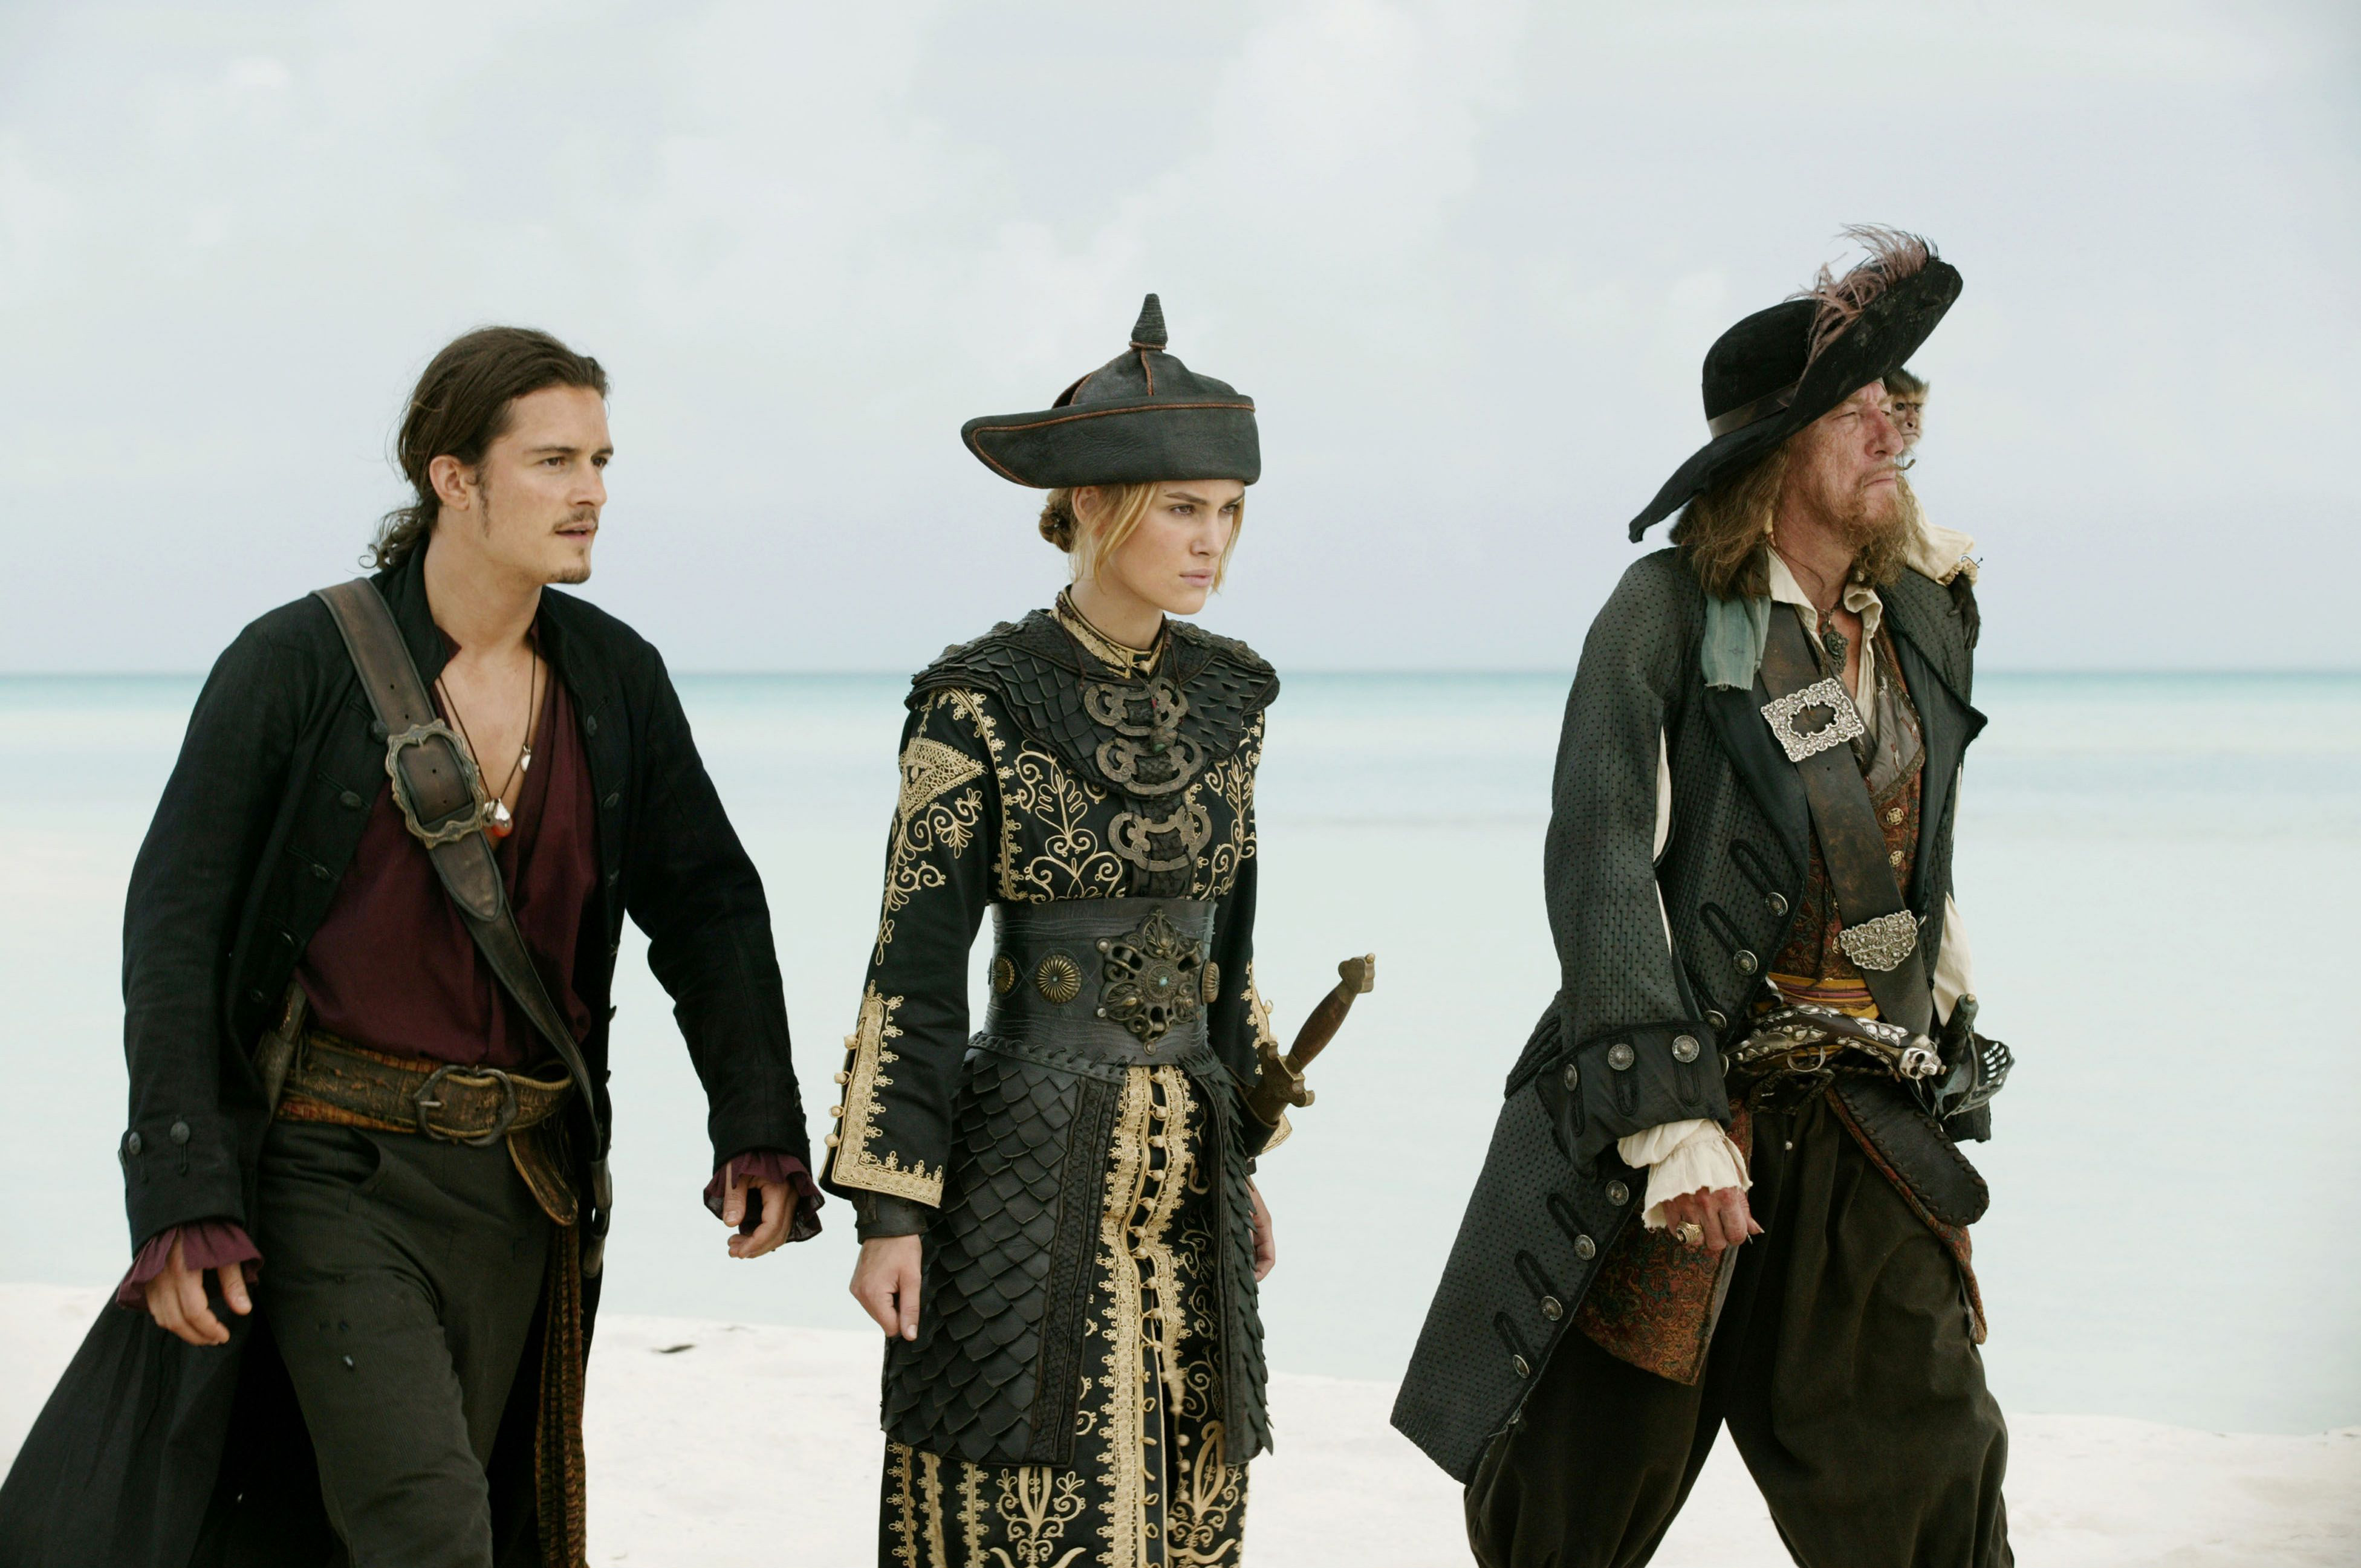 will turner, movie, pirates of the caribbean: at world's end, elizabeth swann, geoffrey rush, hector barbossa, keira knightley, orlando bloom, pirates of the caribbean